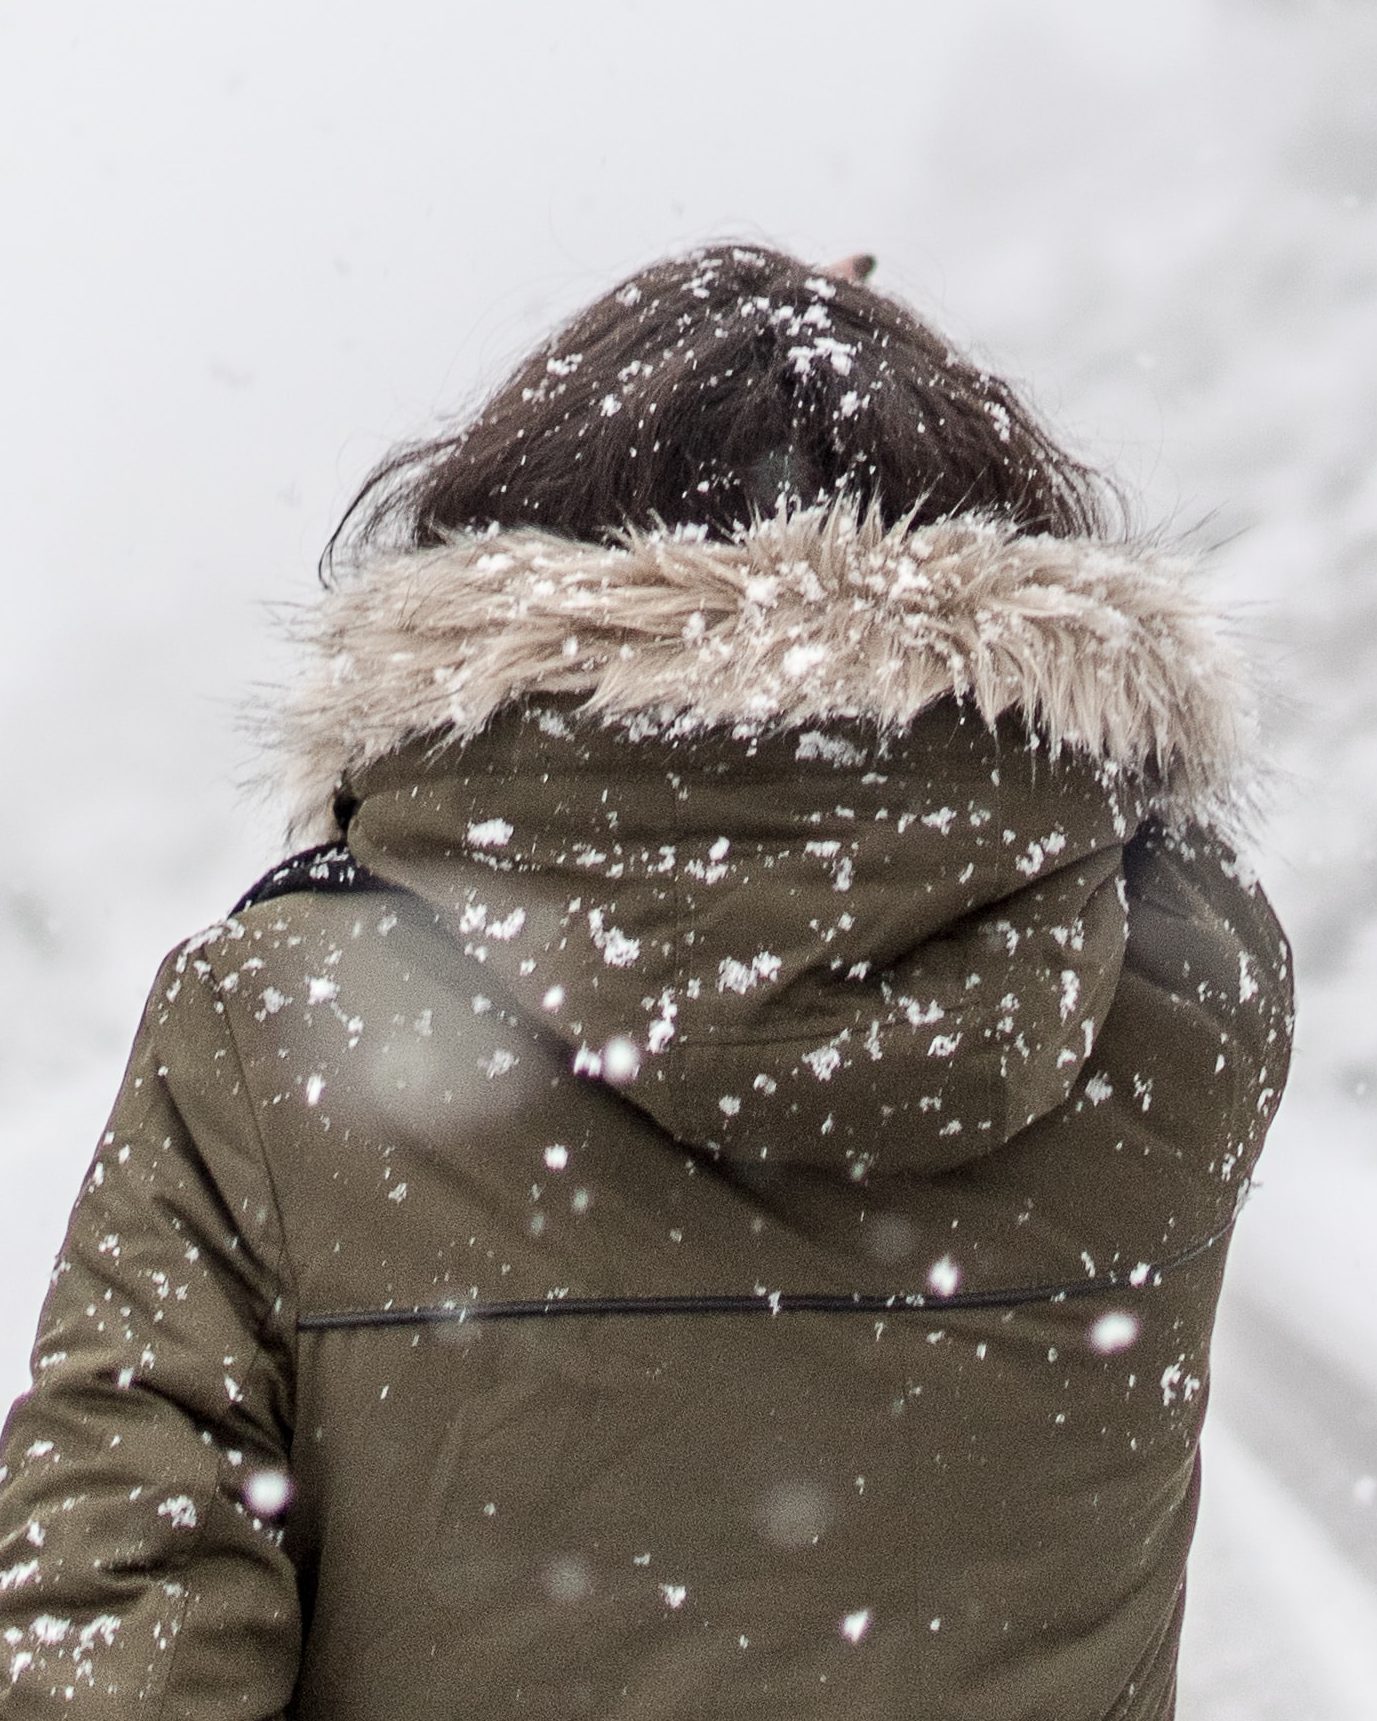 survival skills to prepare yourself for harsh winter months